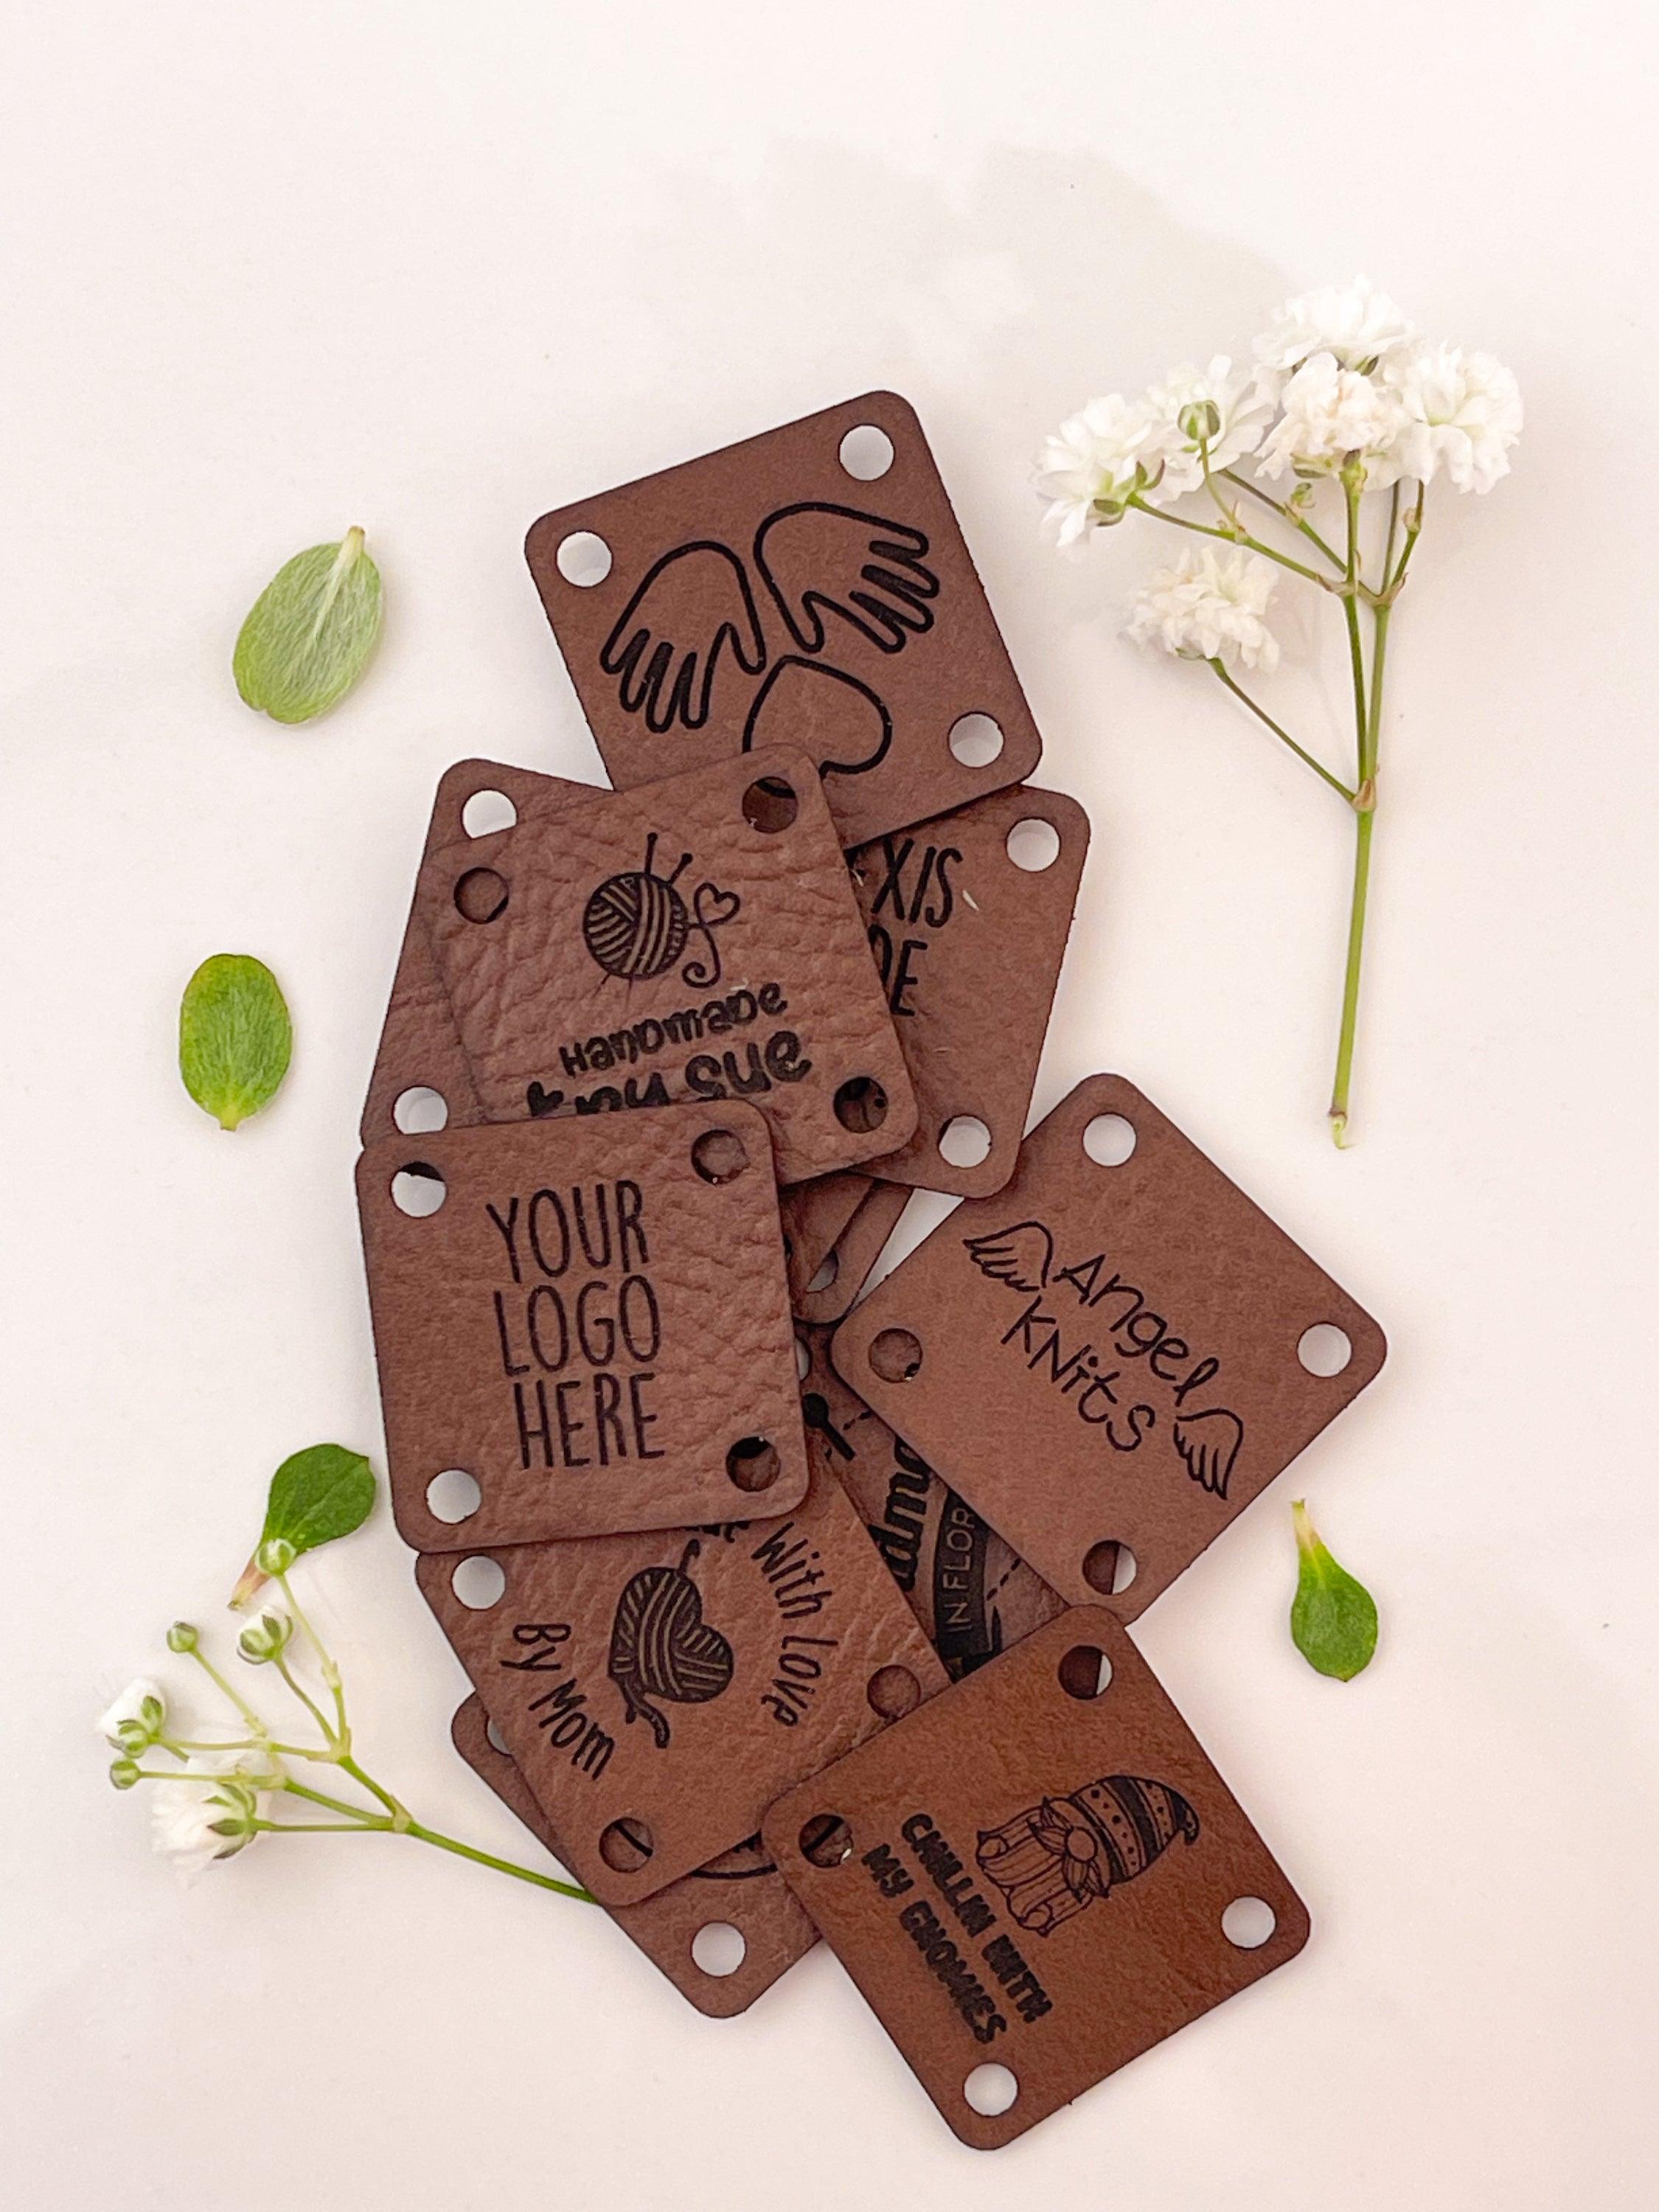 Leather Labels - Custom Faux Leather Tags for Handmade Items, with rivets,  Personalized Vegan Labels